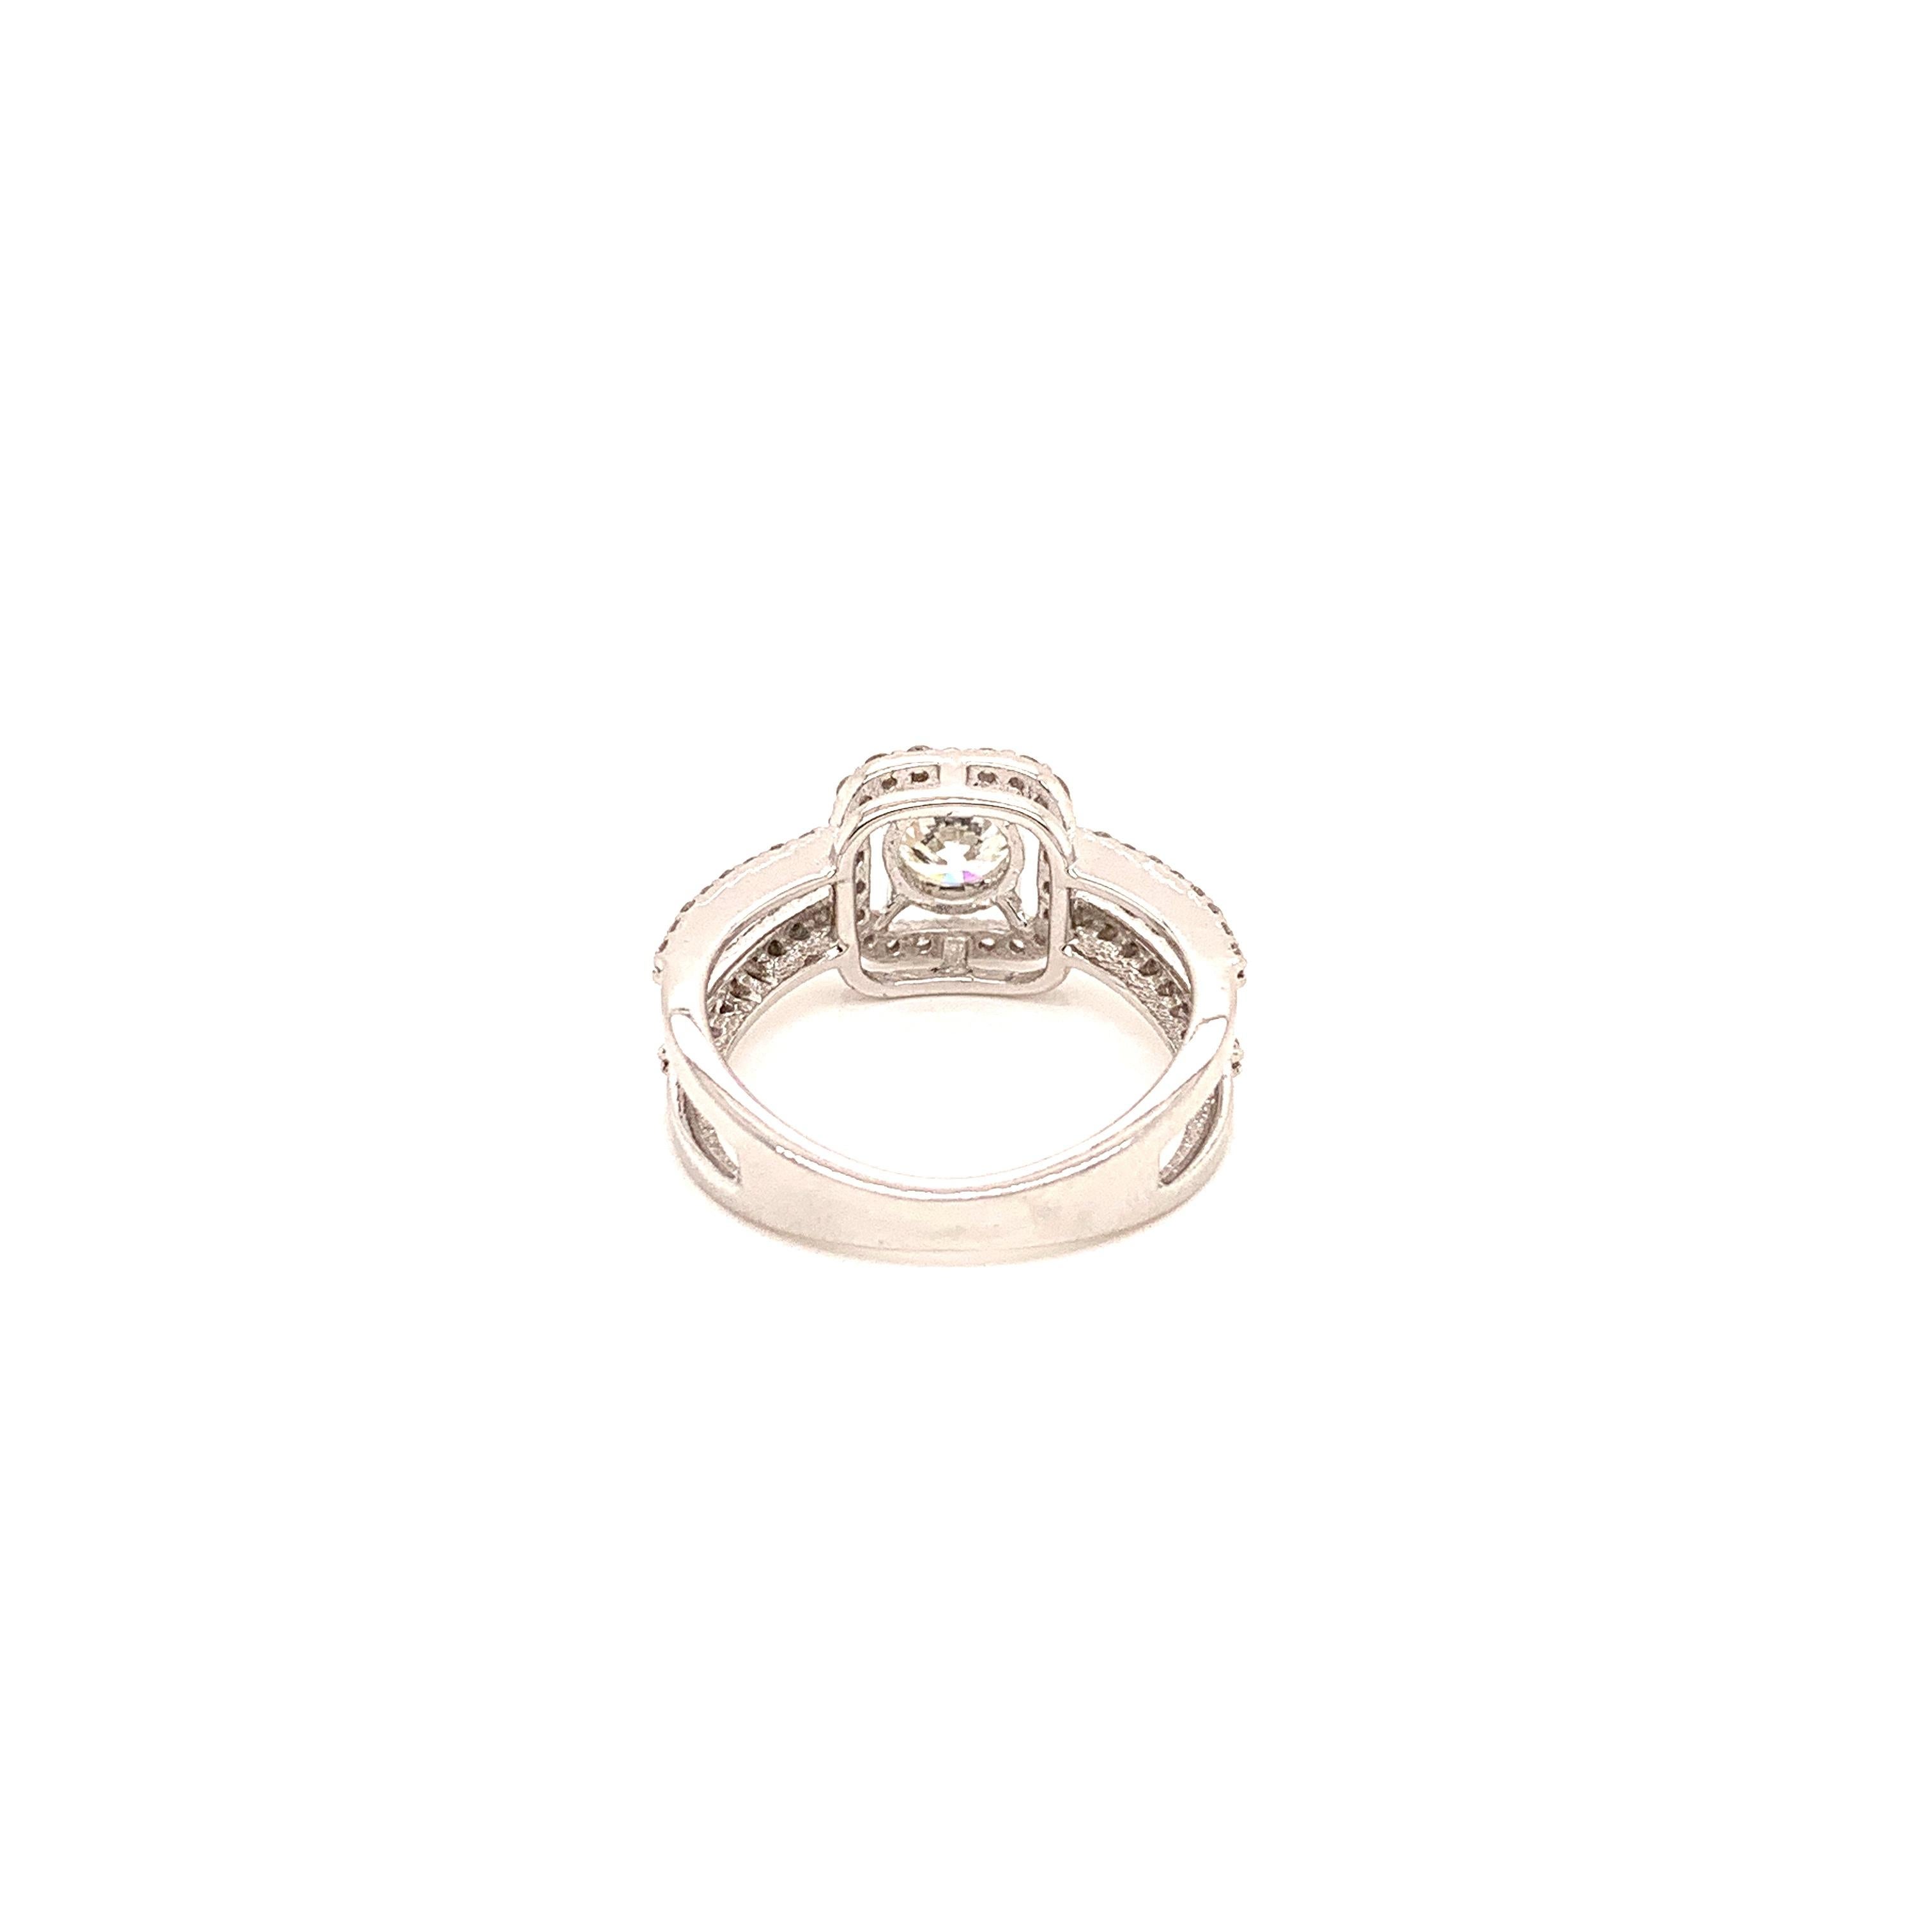 GIA Certified 0.70 Carat Round Brilliant White Diamond Gold Engagement Ring:

A classic diamond engagement ring, it features a GIA certified 0.70 carat round brilliant cut white diamond in the centre, accentuated by white round diamonds weighing